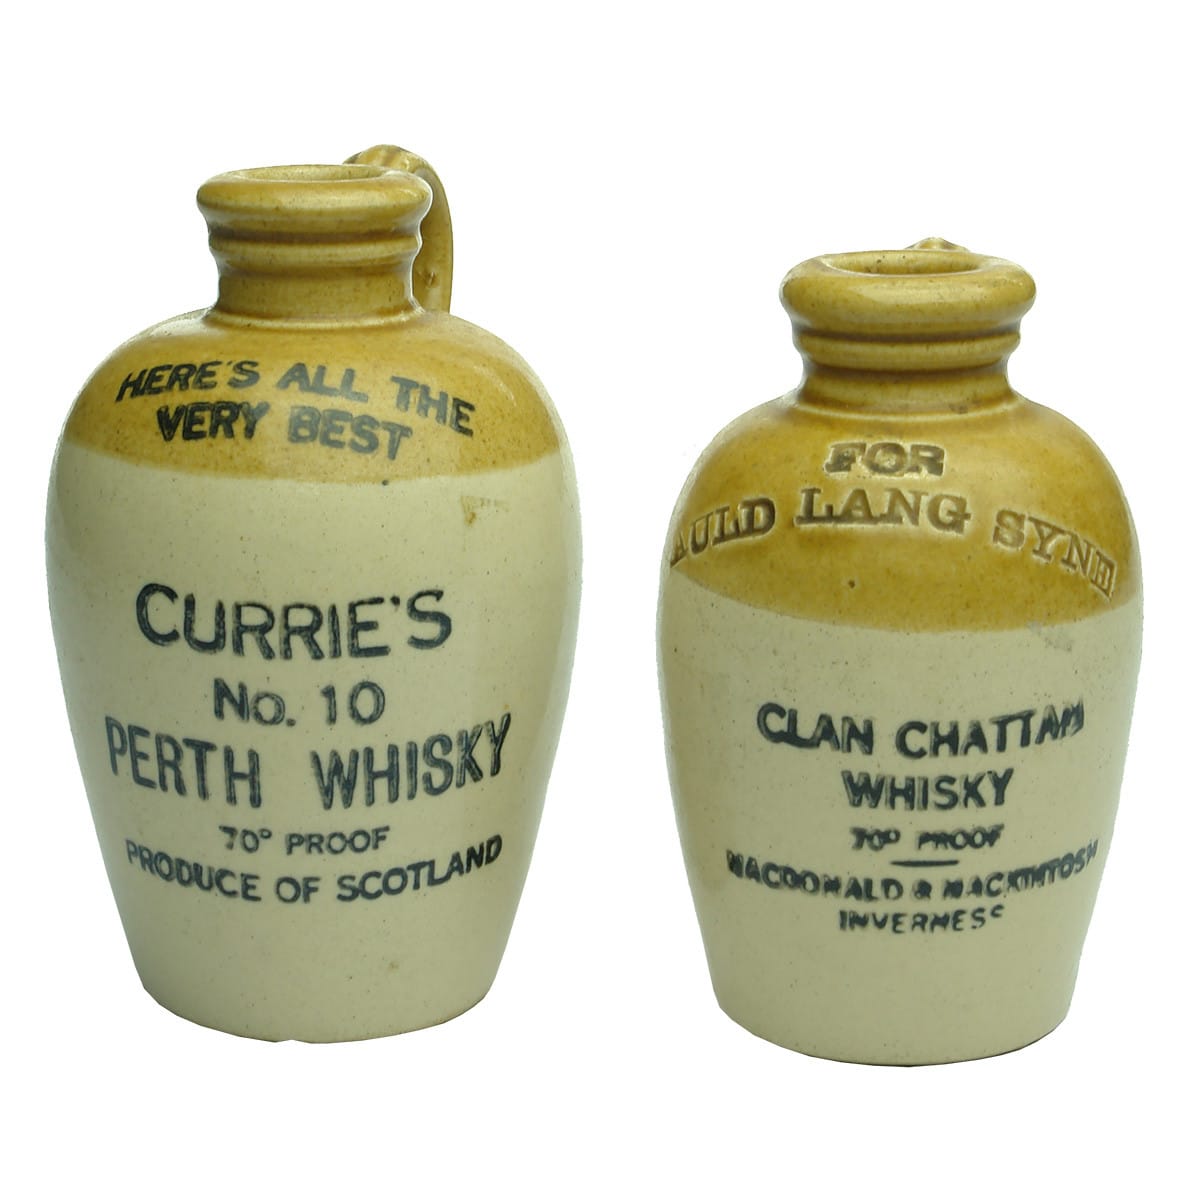 Miniature. Currie's Perth Whisky; Clan Chattam Whisky. (Scotland)